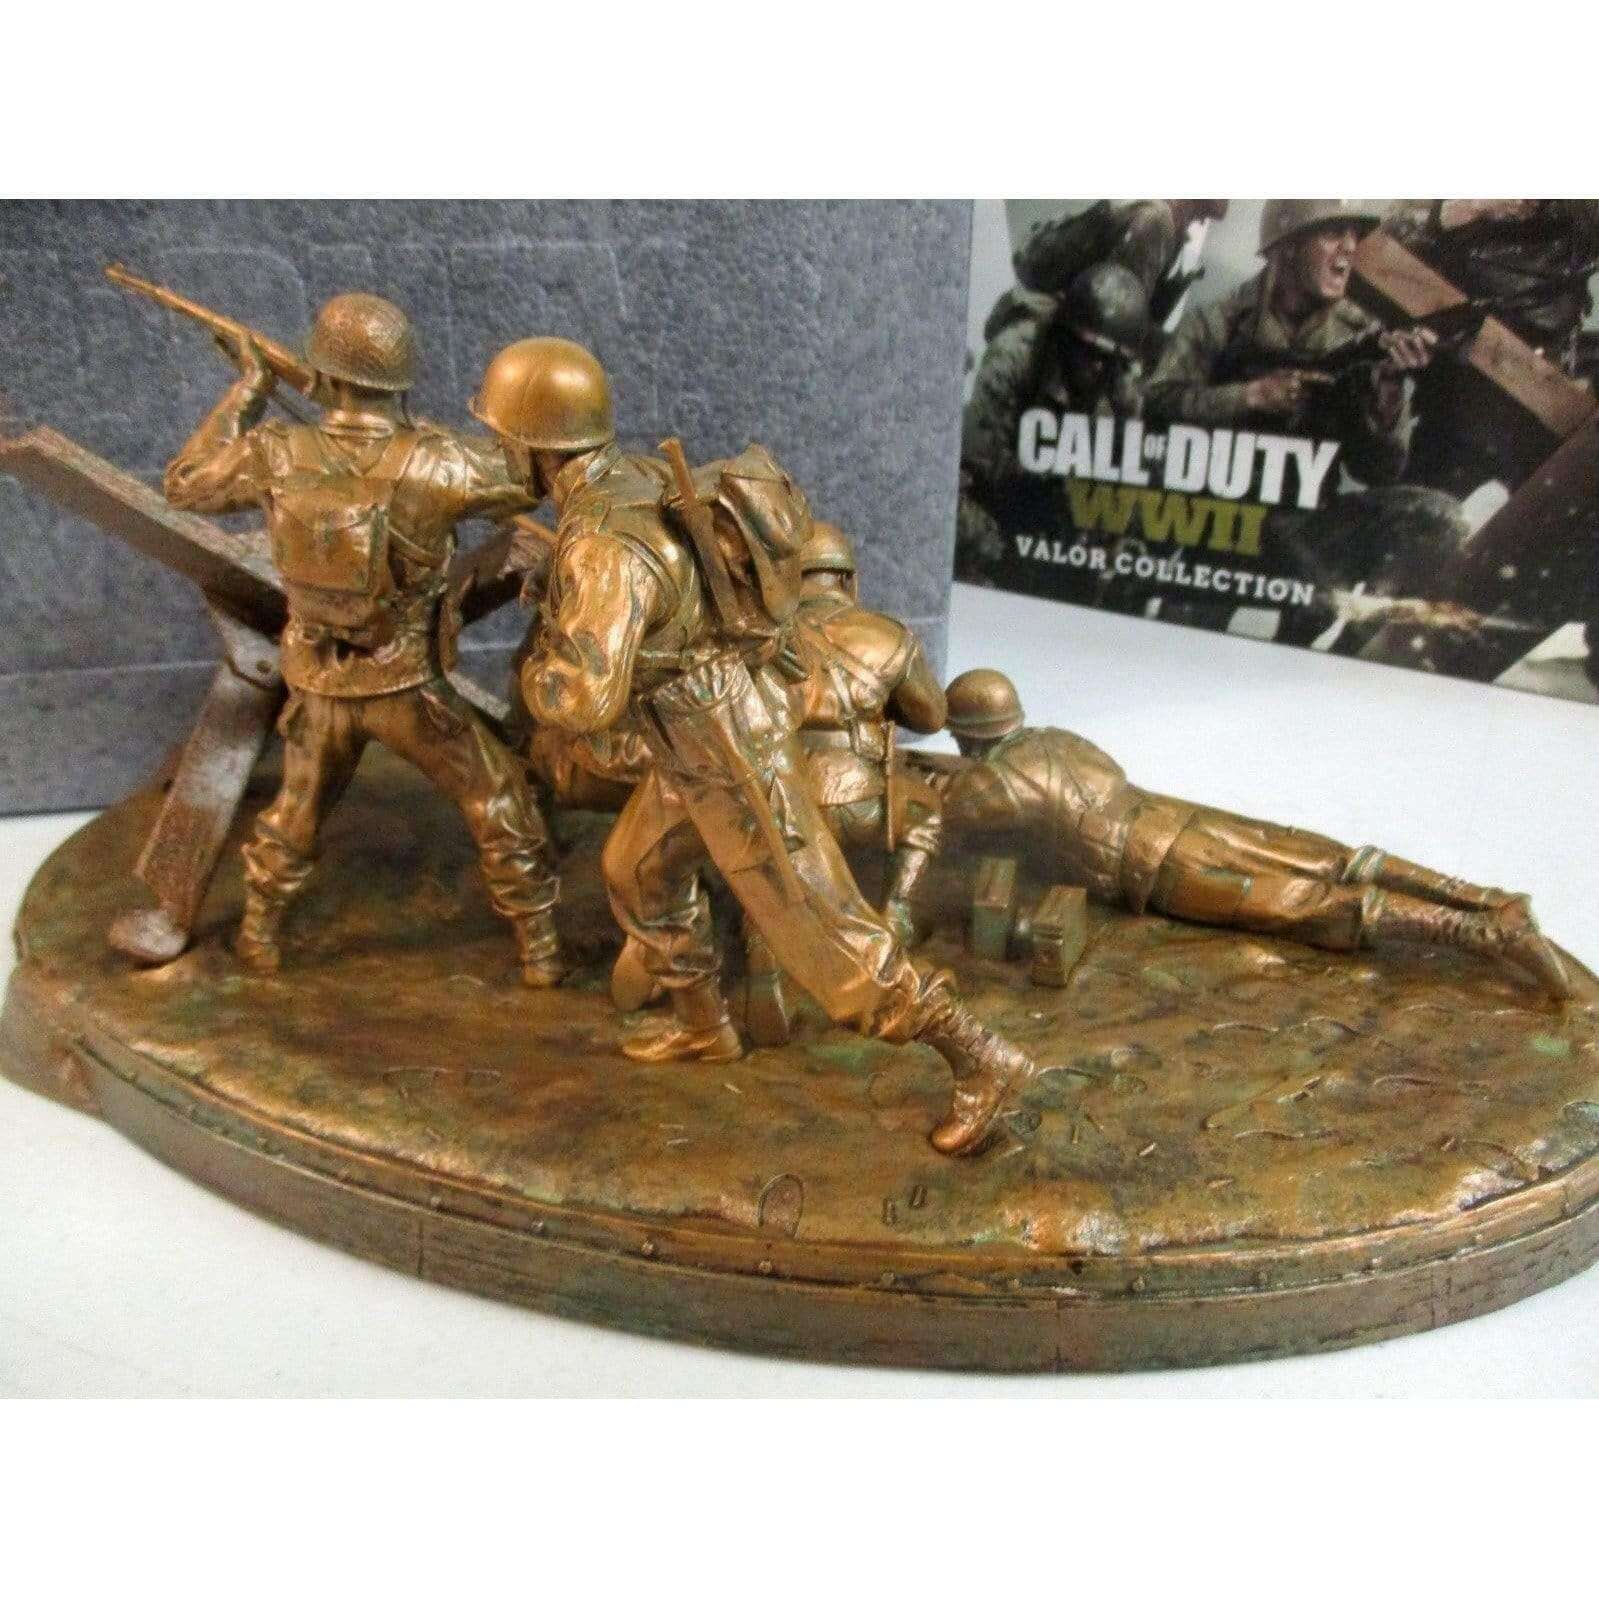 Call of Duty: WW2's Valor Collection comes with a big ol' statue. Obviously.